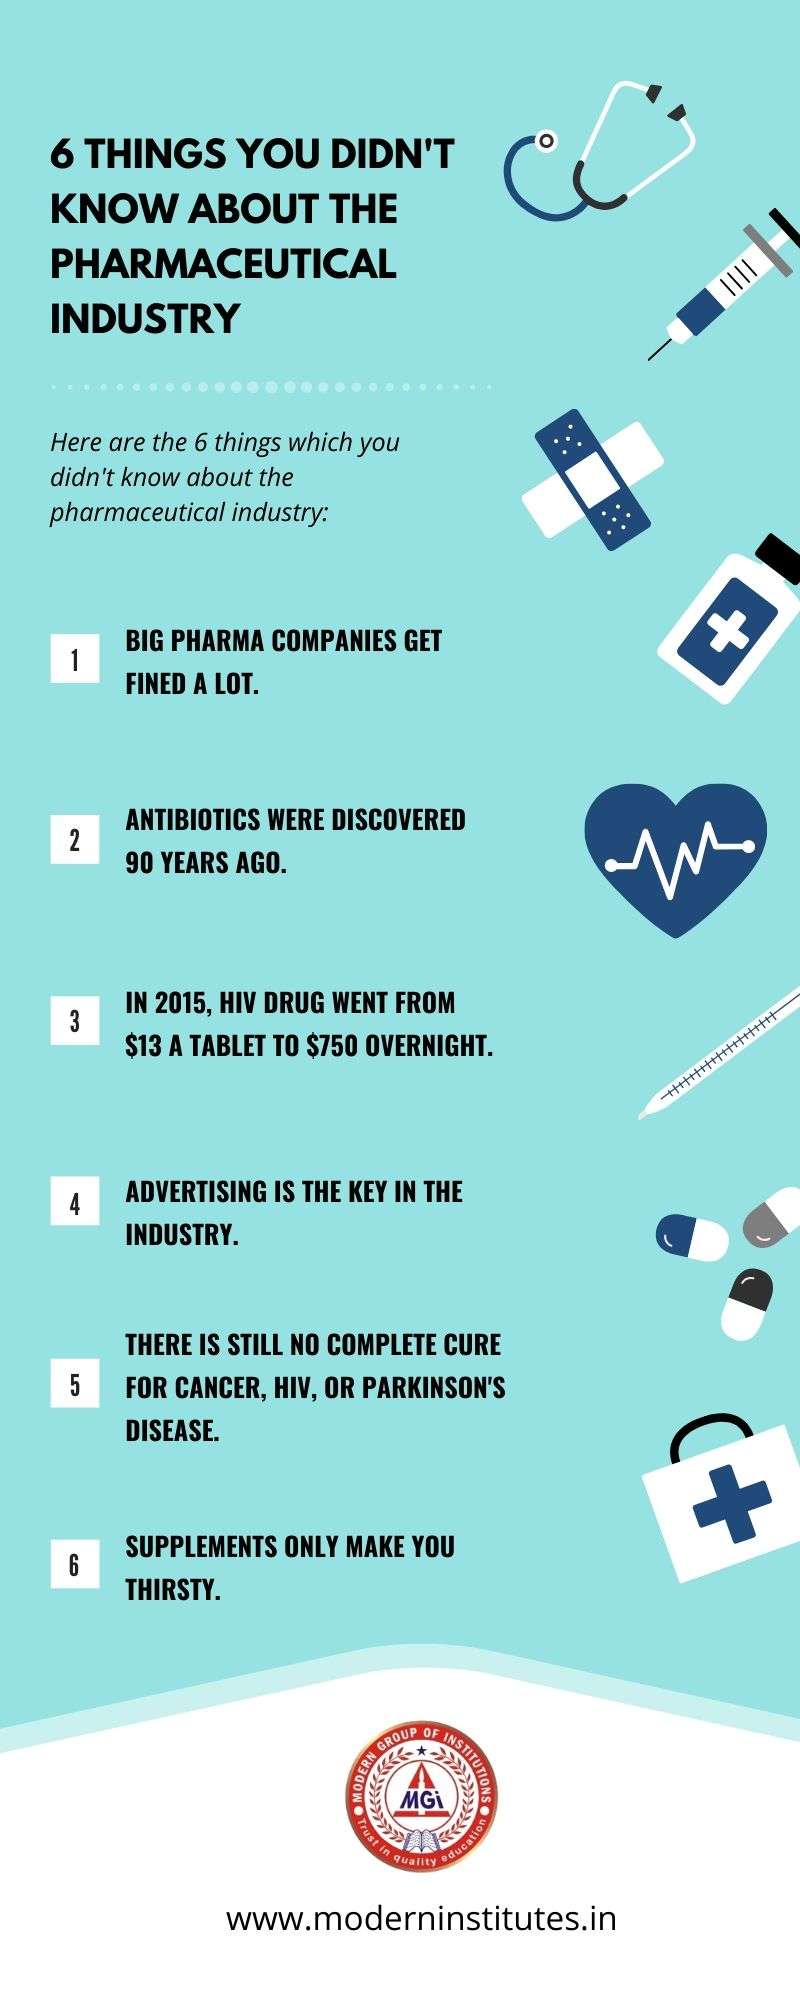 6 Things You Didn't Know About The Pharmaceutical Industry